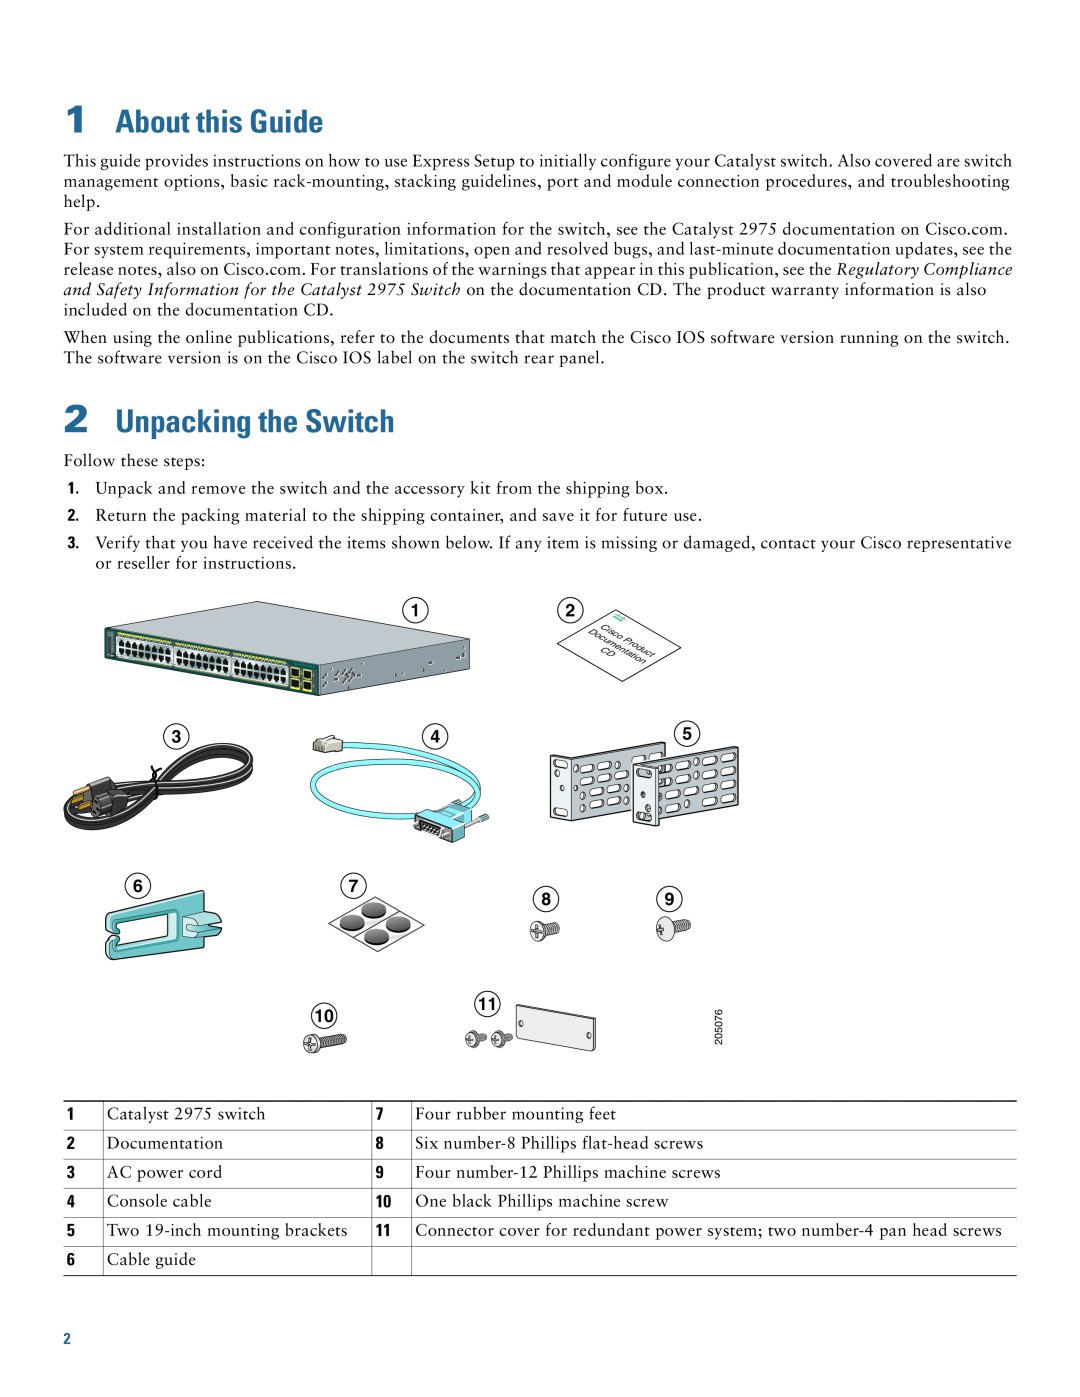 Cisco Systems 2975 manual About this Guide, Unpacking the Switch 